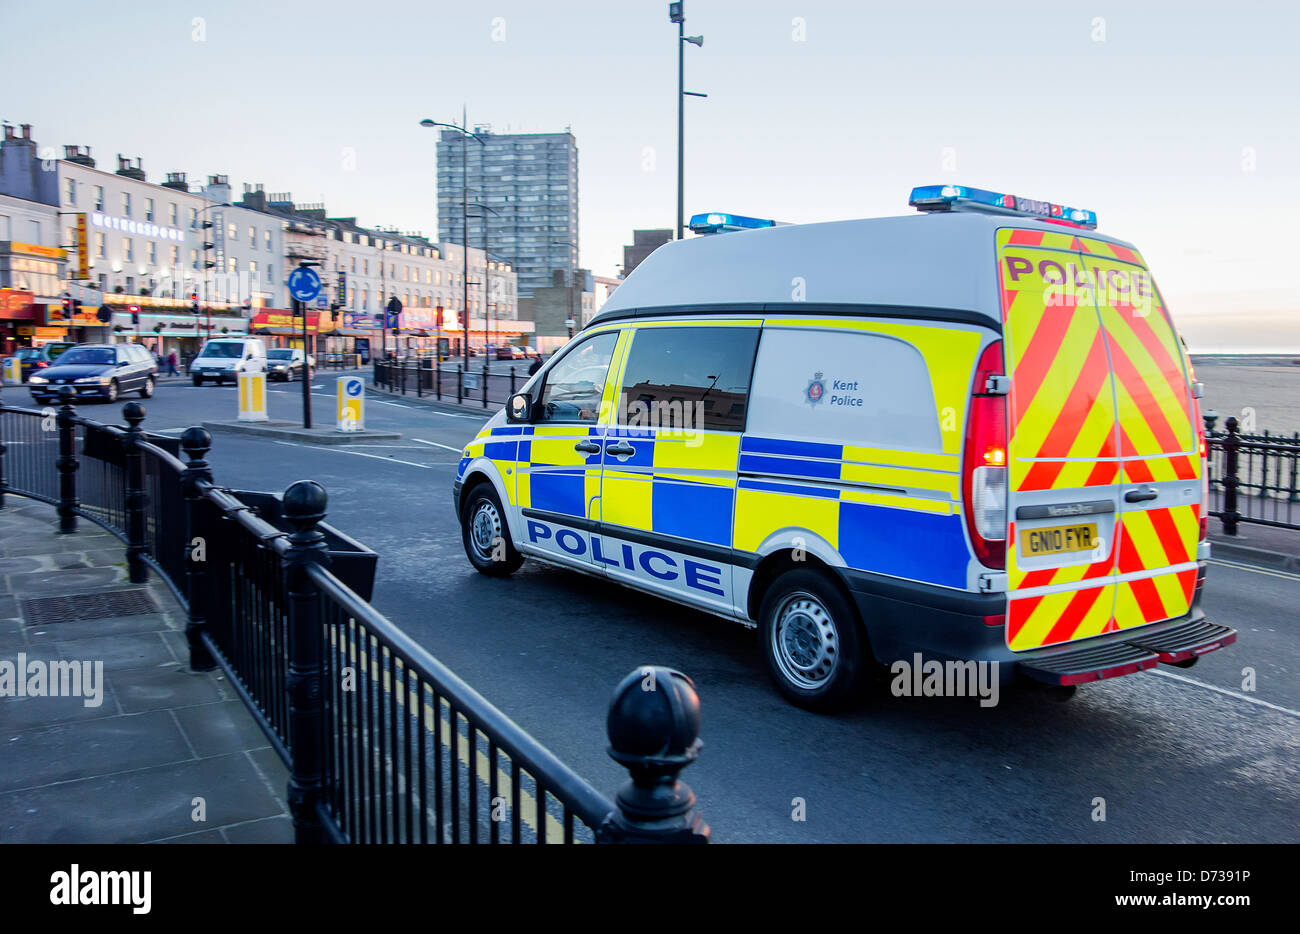 Police Car Van in action on Call Margate Seafront Stock Photo